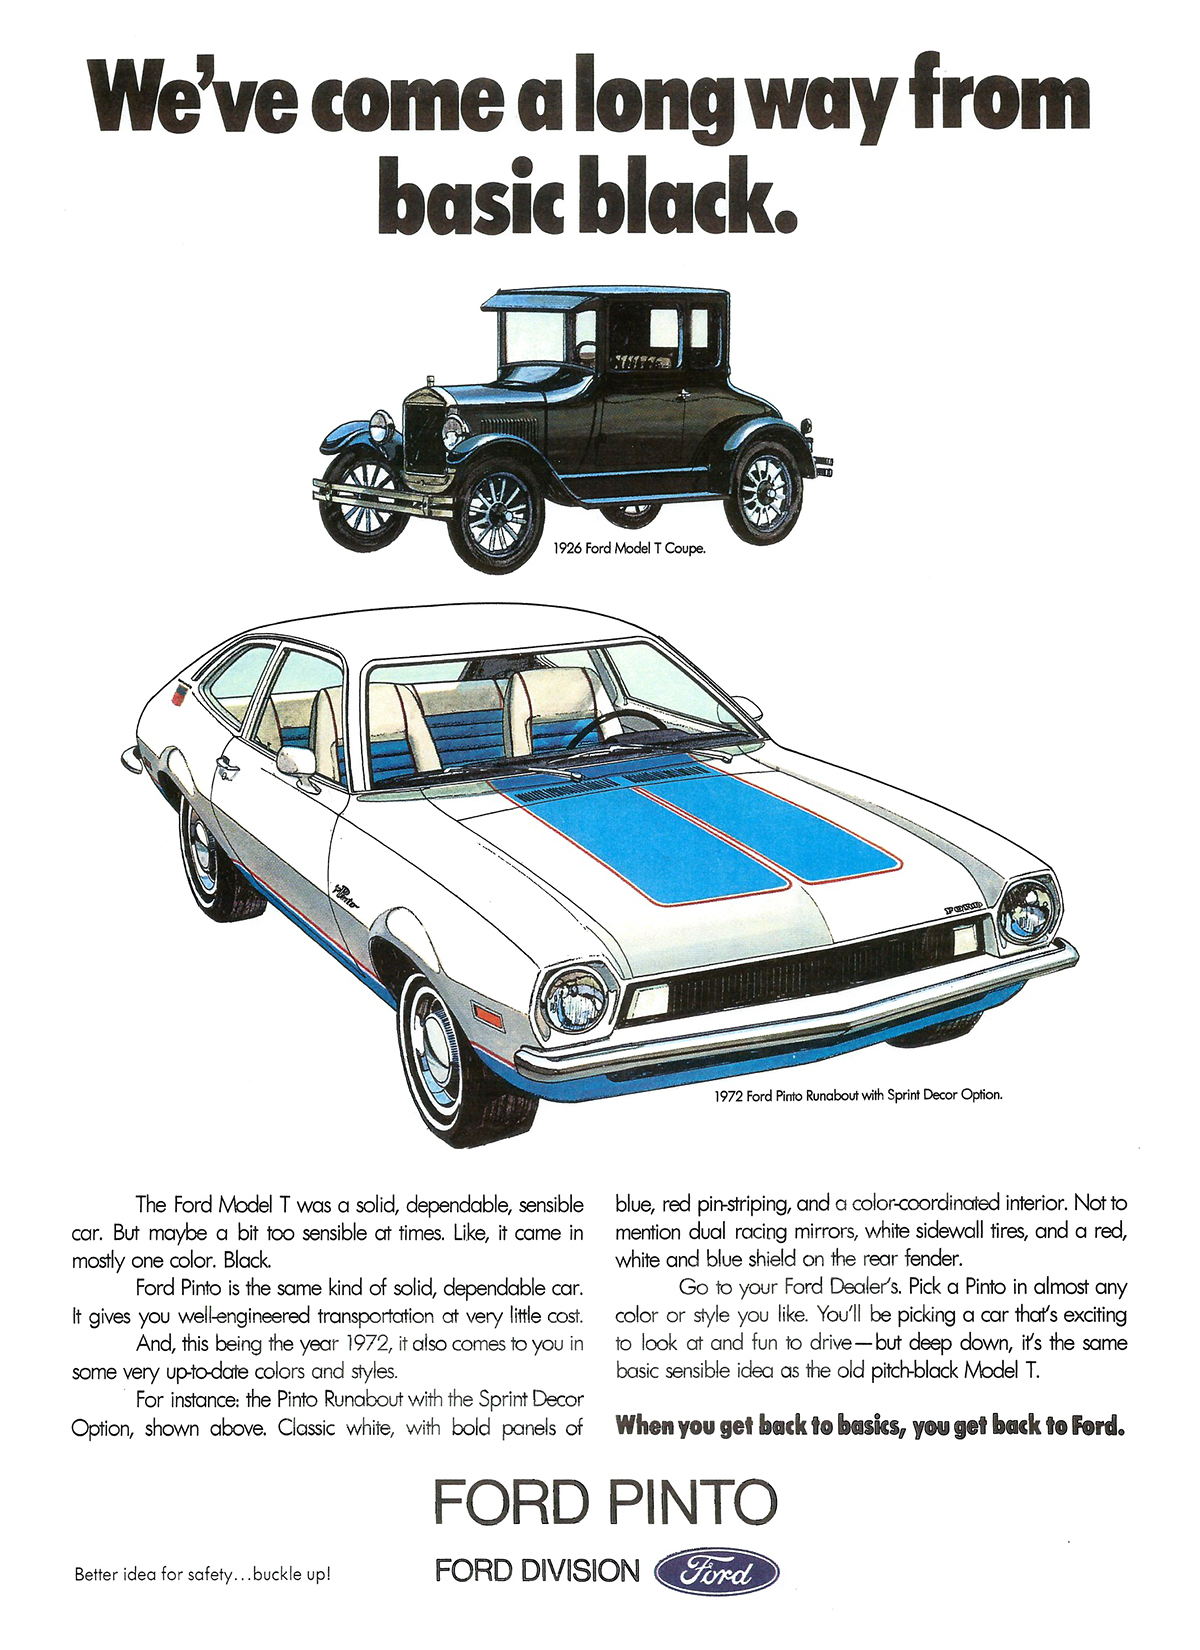 Ford Pinto Runabout With Sprint Decor Option and 1924 Model T Coupe Ad (May–June, 1972) - We've come a long way from basic black.